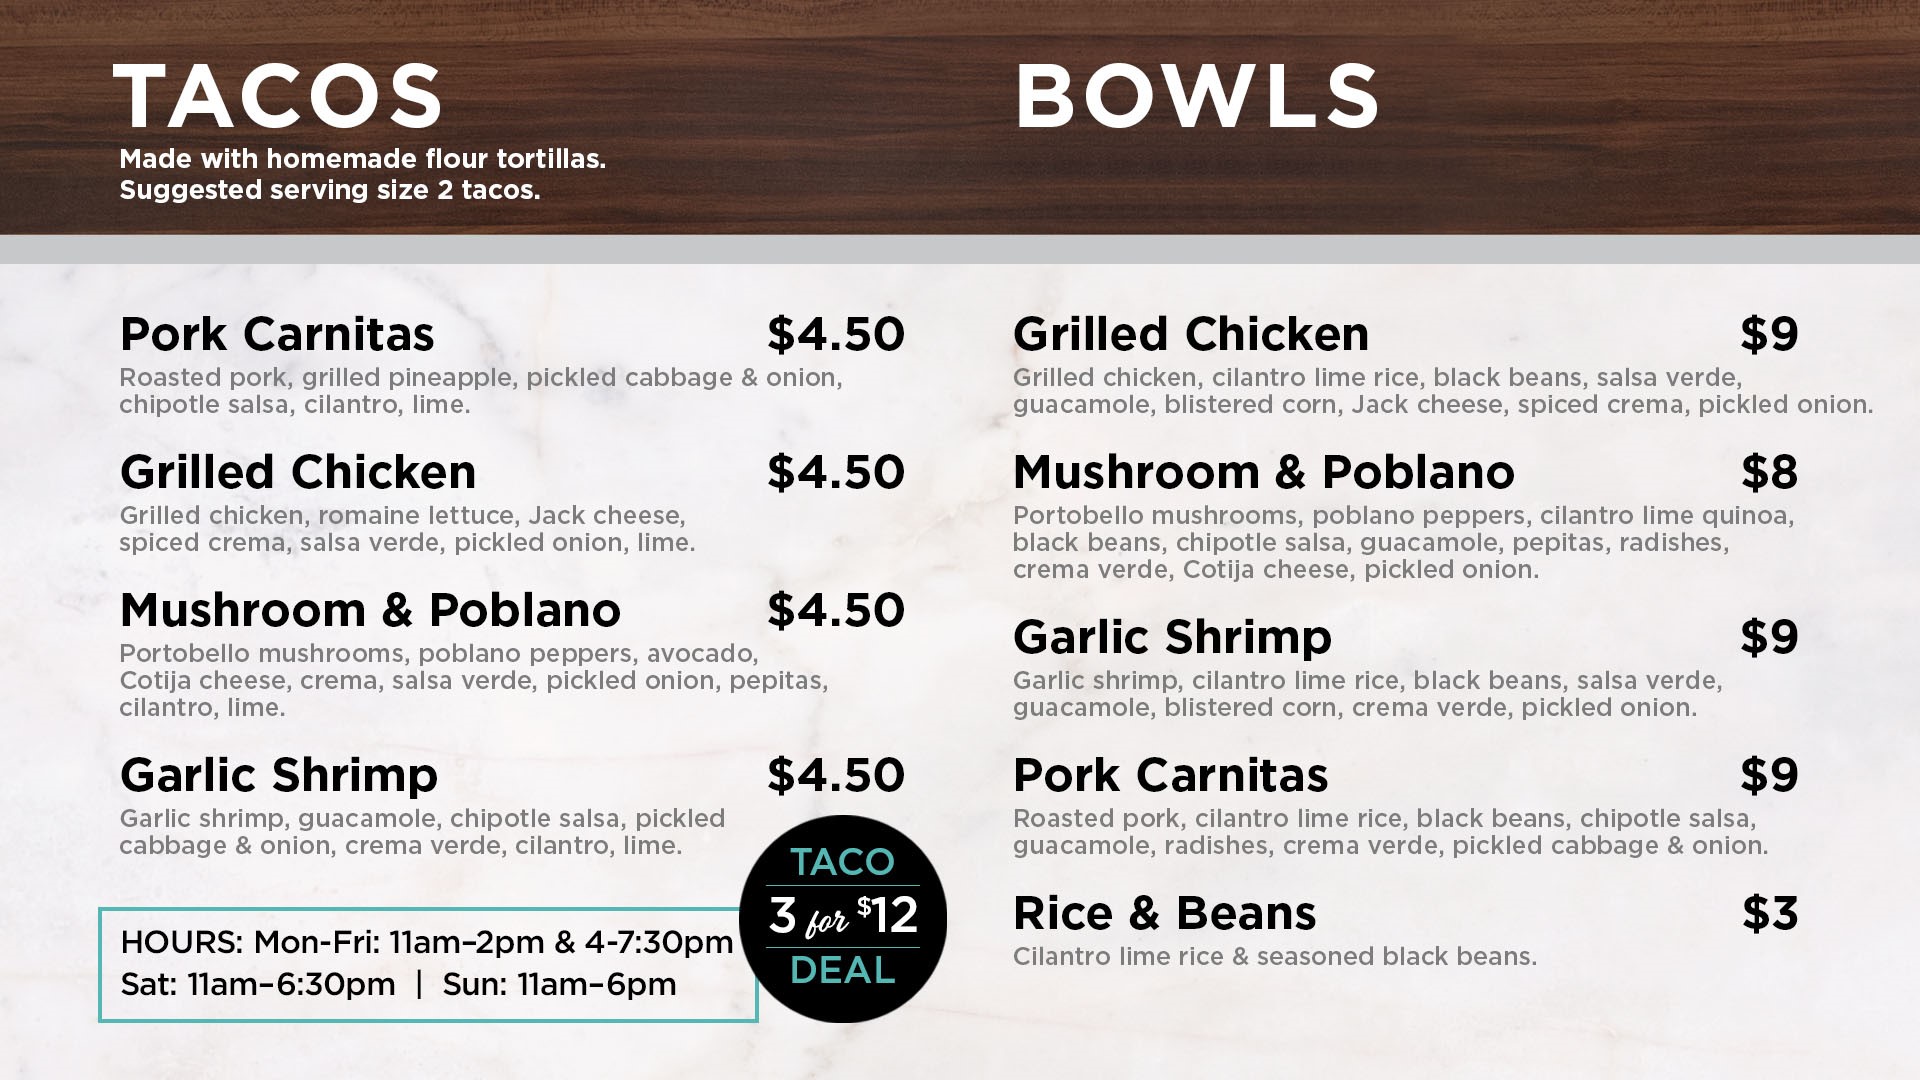 Heinen's Tasting Room Menu Featuring Tacos and Bowls